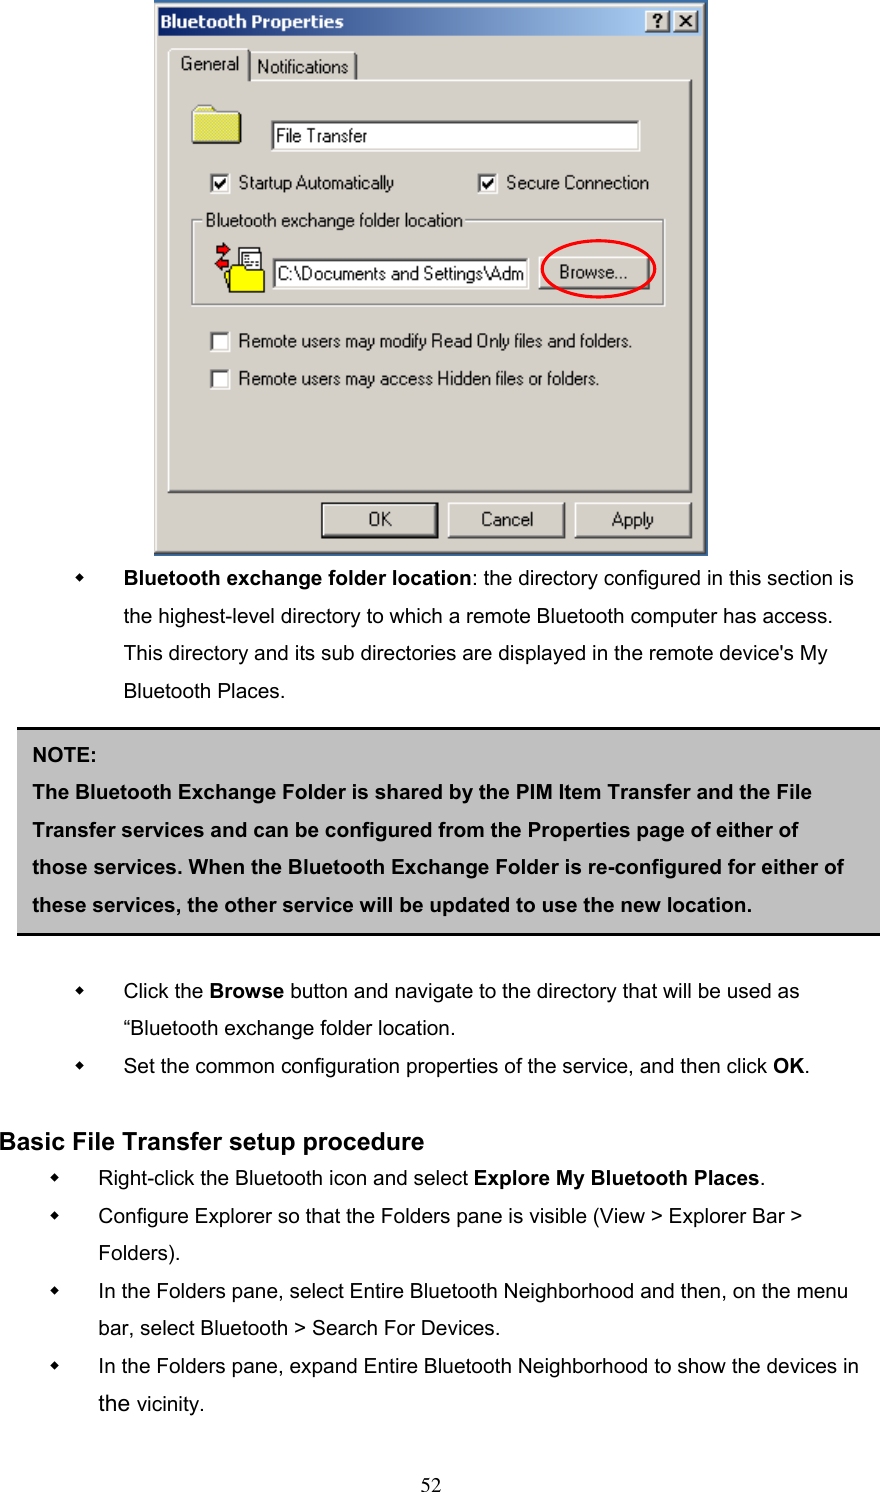    Bluetooth exchange folder location: the directory configured in this section is the highest-level directory to which a remote Bluetooth computer has access. This directory and its sub directories are displayed in the remote device&apos;s My Bluetooth Places.        NOTE:  The Bluetooth Exchange Folder is shared by the PIM Item Transfer and the File Transfer services and can be configured from the Properties page of either of those services. When the Bluetooth Exchange Folder is re-configured for either of these services, the other service will be updated to use the new location.   Click the Browse button and navigate to the directory that will be used as “Bluetooth exchange folder location.   Set the common configuration properties of the service, and then click OK.  Basic File Transfer setup procedure   Right-click the Bluetooth icon and select Explore My Bluetooth Places.   Configure Explorer so that the Folders pane is visible (View &gt; Explorer Bar &gt; Folders).   In the Folders pane, select Entire Bluetooth Neighborhood and then, on the menu bar, select Bluetooth &gt; Search For Devices.   In the Folders pane, expand Entire Bluetooth Neighborhood to show the devices in the vicinity.  52 